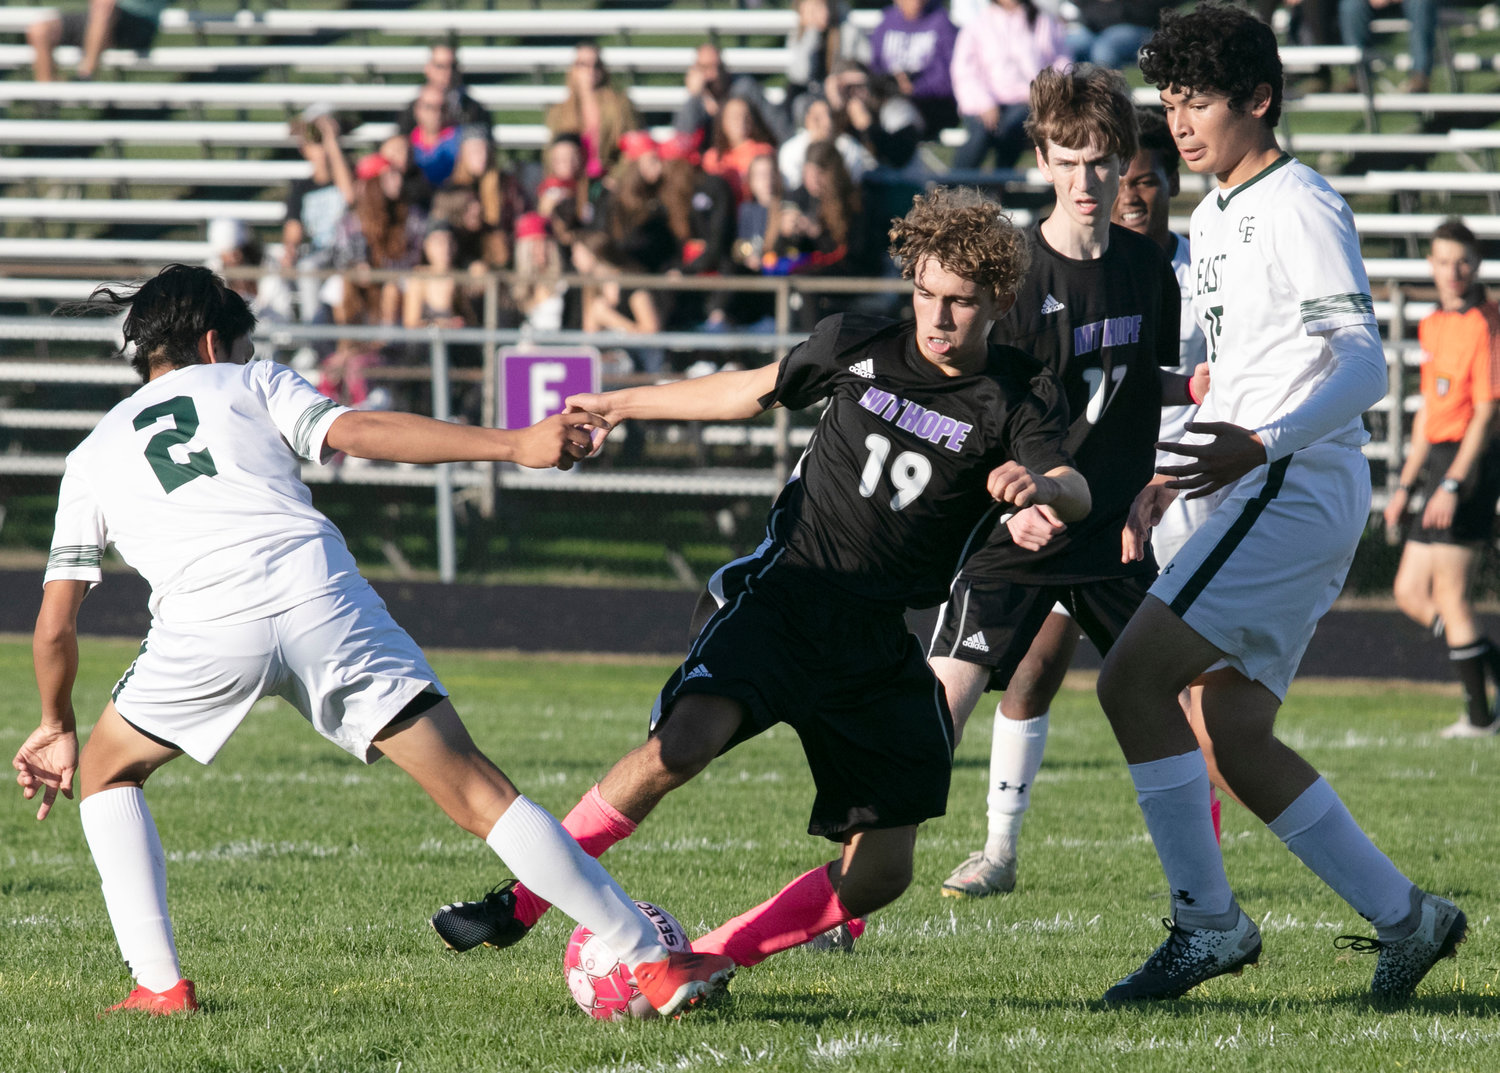 Winger Maddox Canario vies for the ball in the East box, with Dylan Brol looking on.